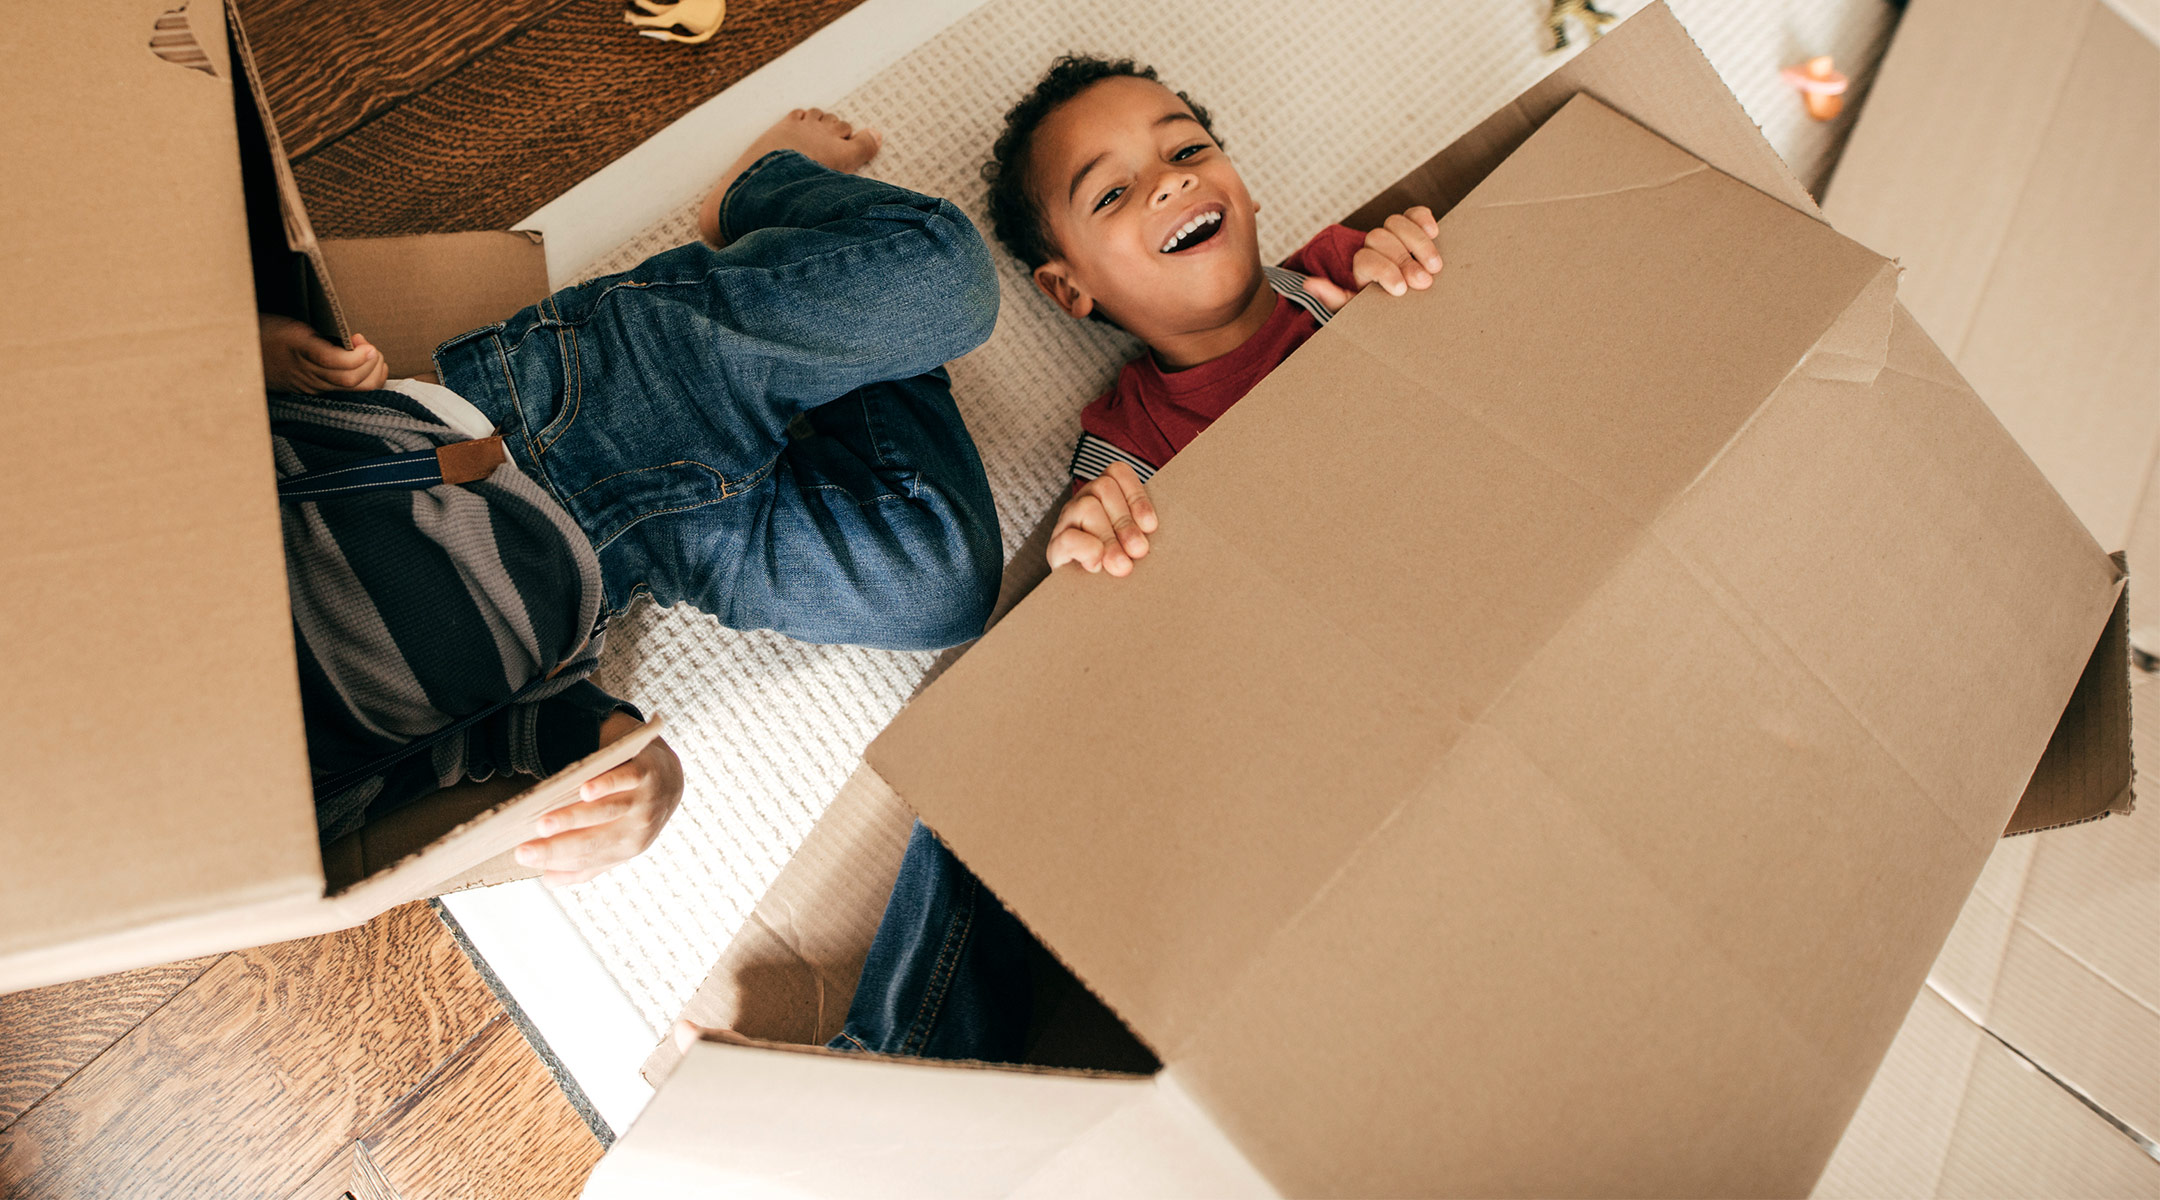 cardboard box toys for toddlers